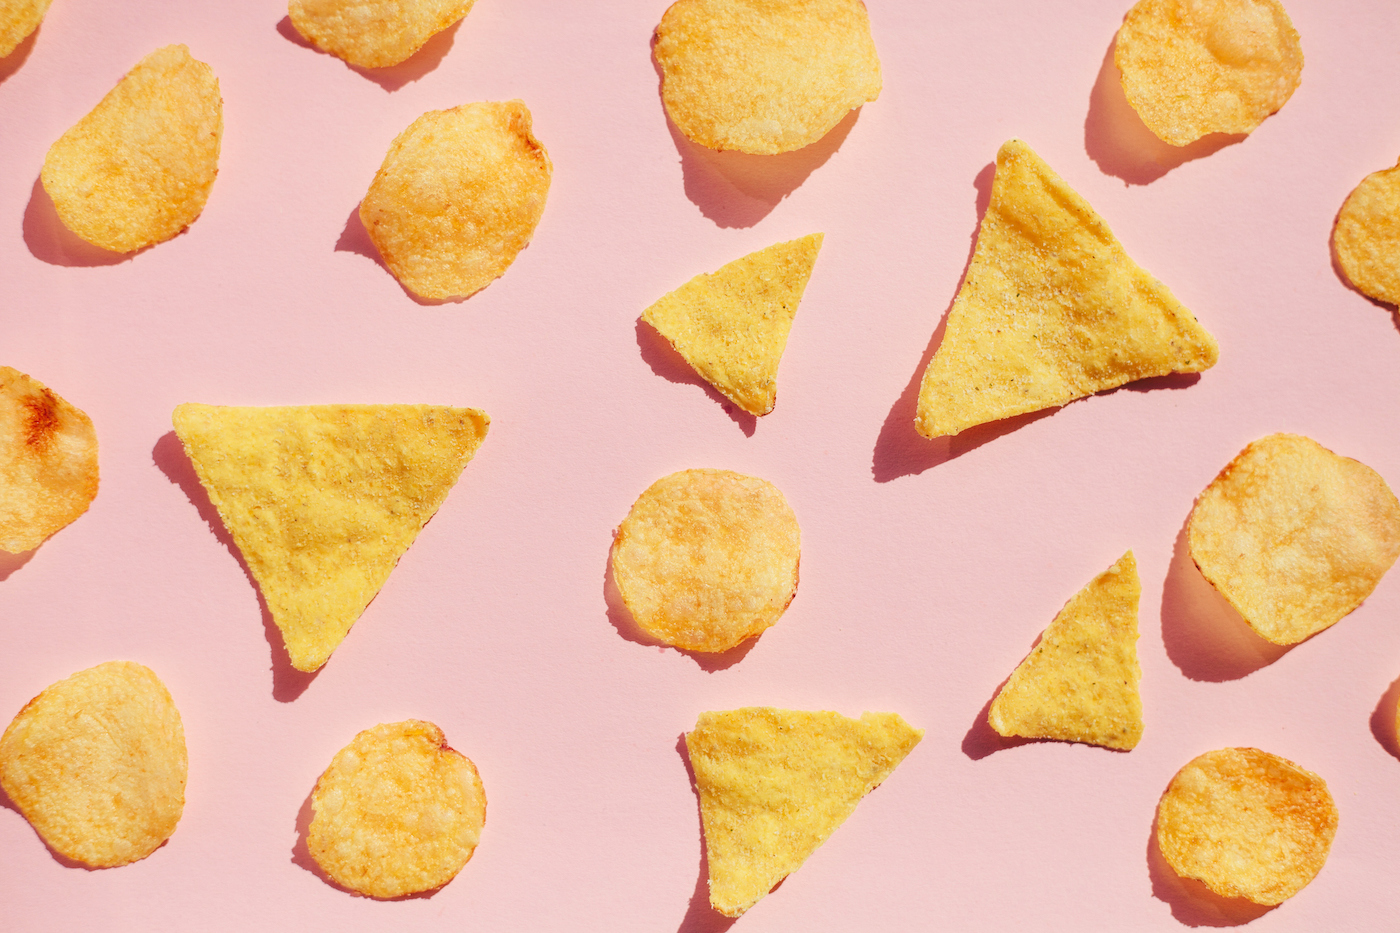 Potato chips pattern on pink background, hard light with shadows.  Unhealthy junk food concept.